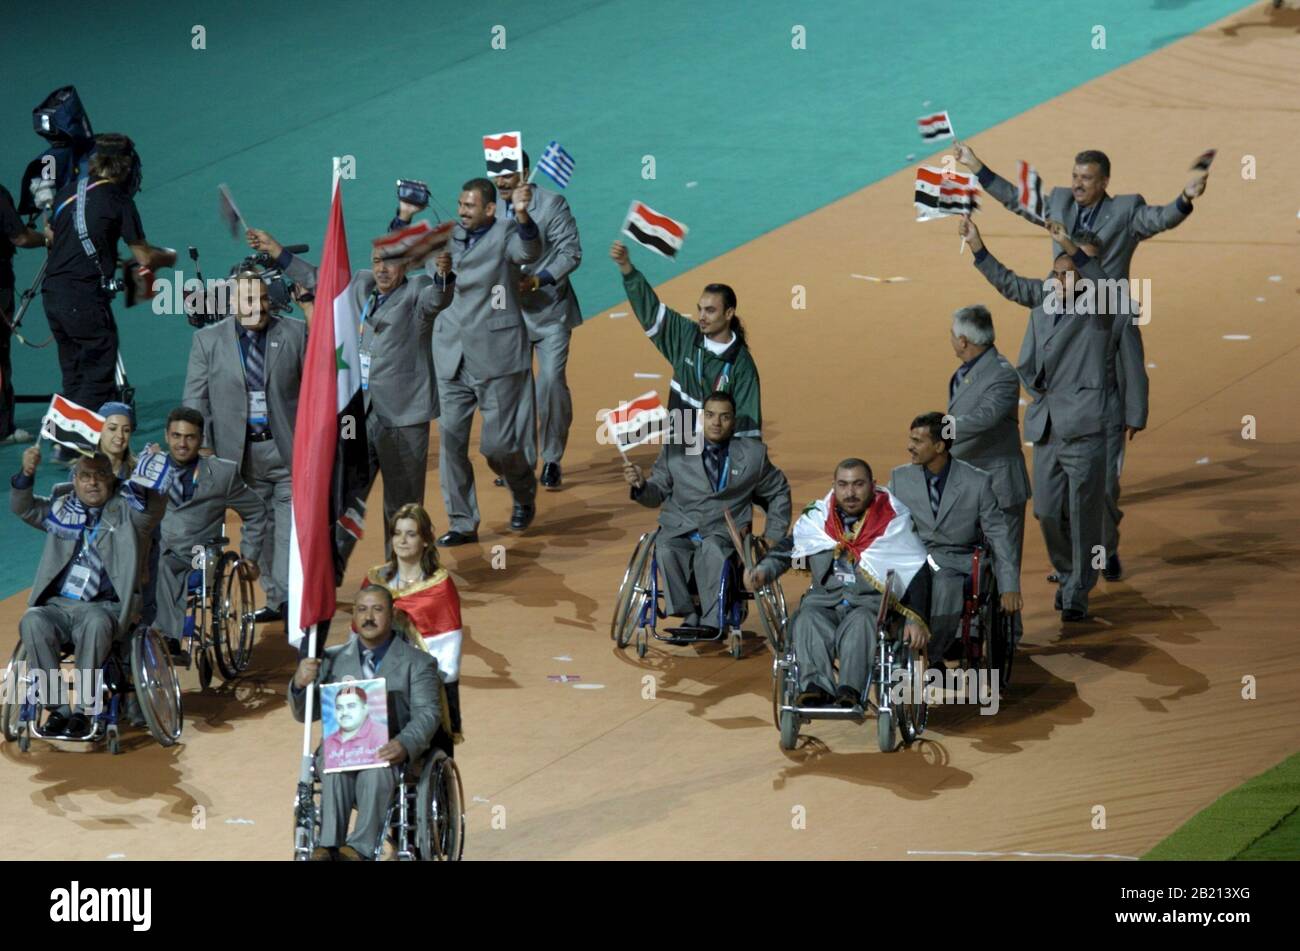 Athens, Greece 17SEP04:  Members of the Iraqi National Paralympic Team enter the Olympic Stadium Friday night for the opening ceremonies of the 10th Paralympic Games. The team got a rousing reception from the sellout crowd. ©Bob Daemmrich Stock Photo